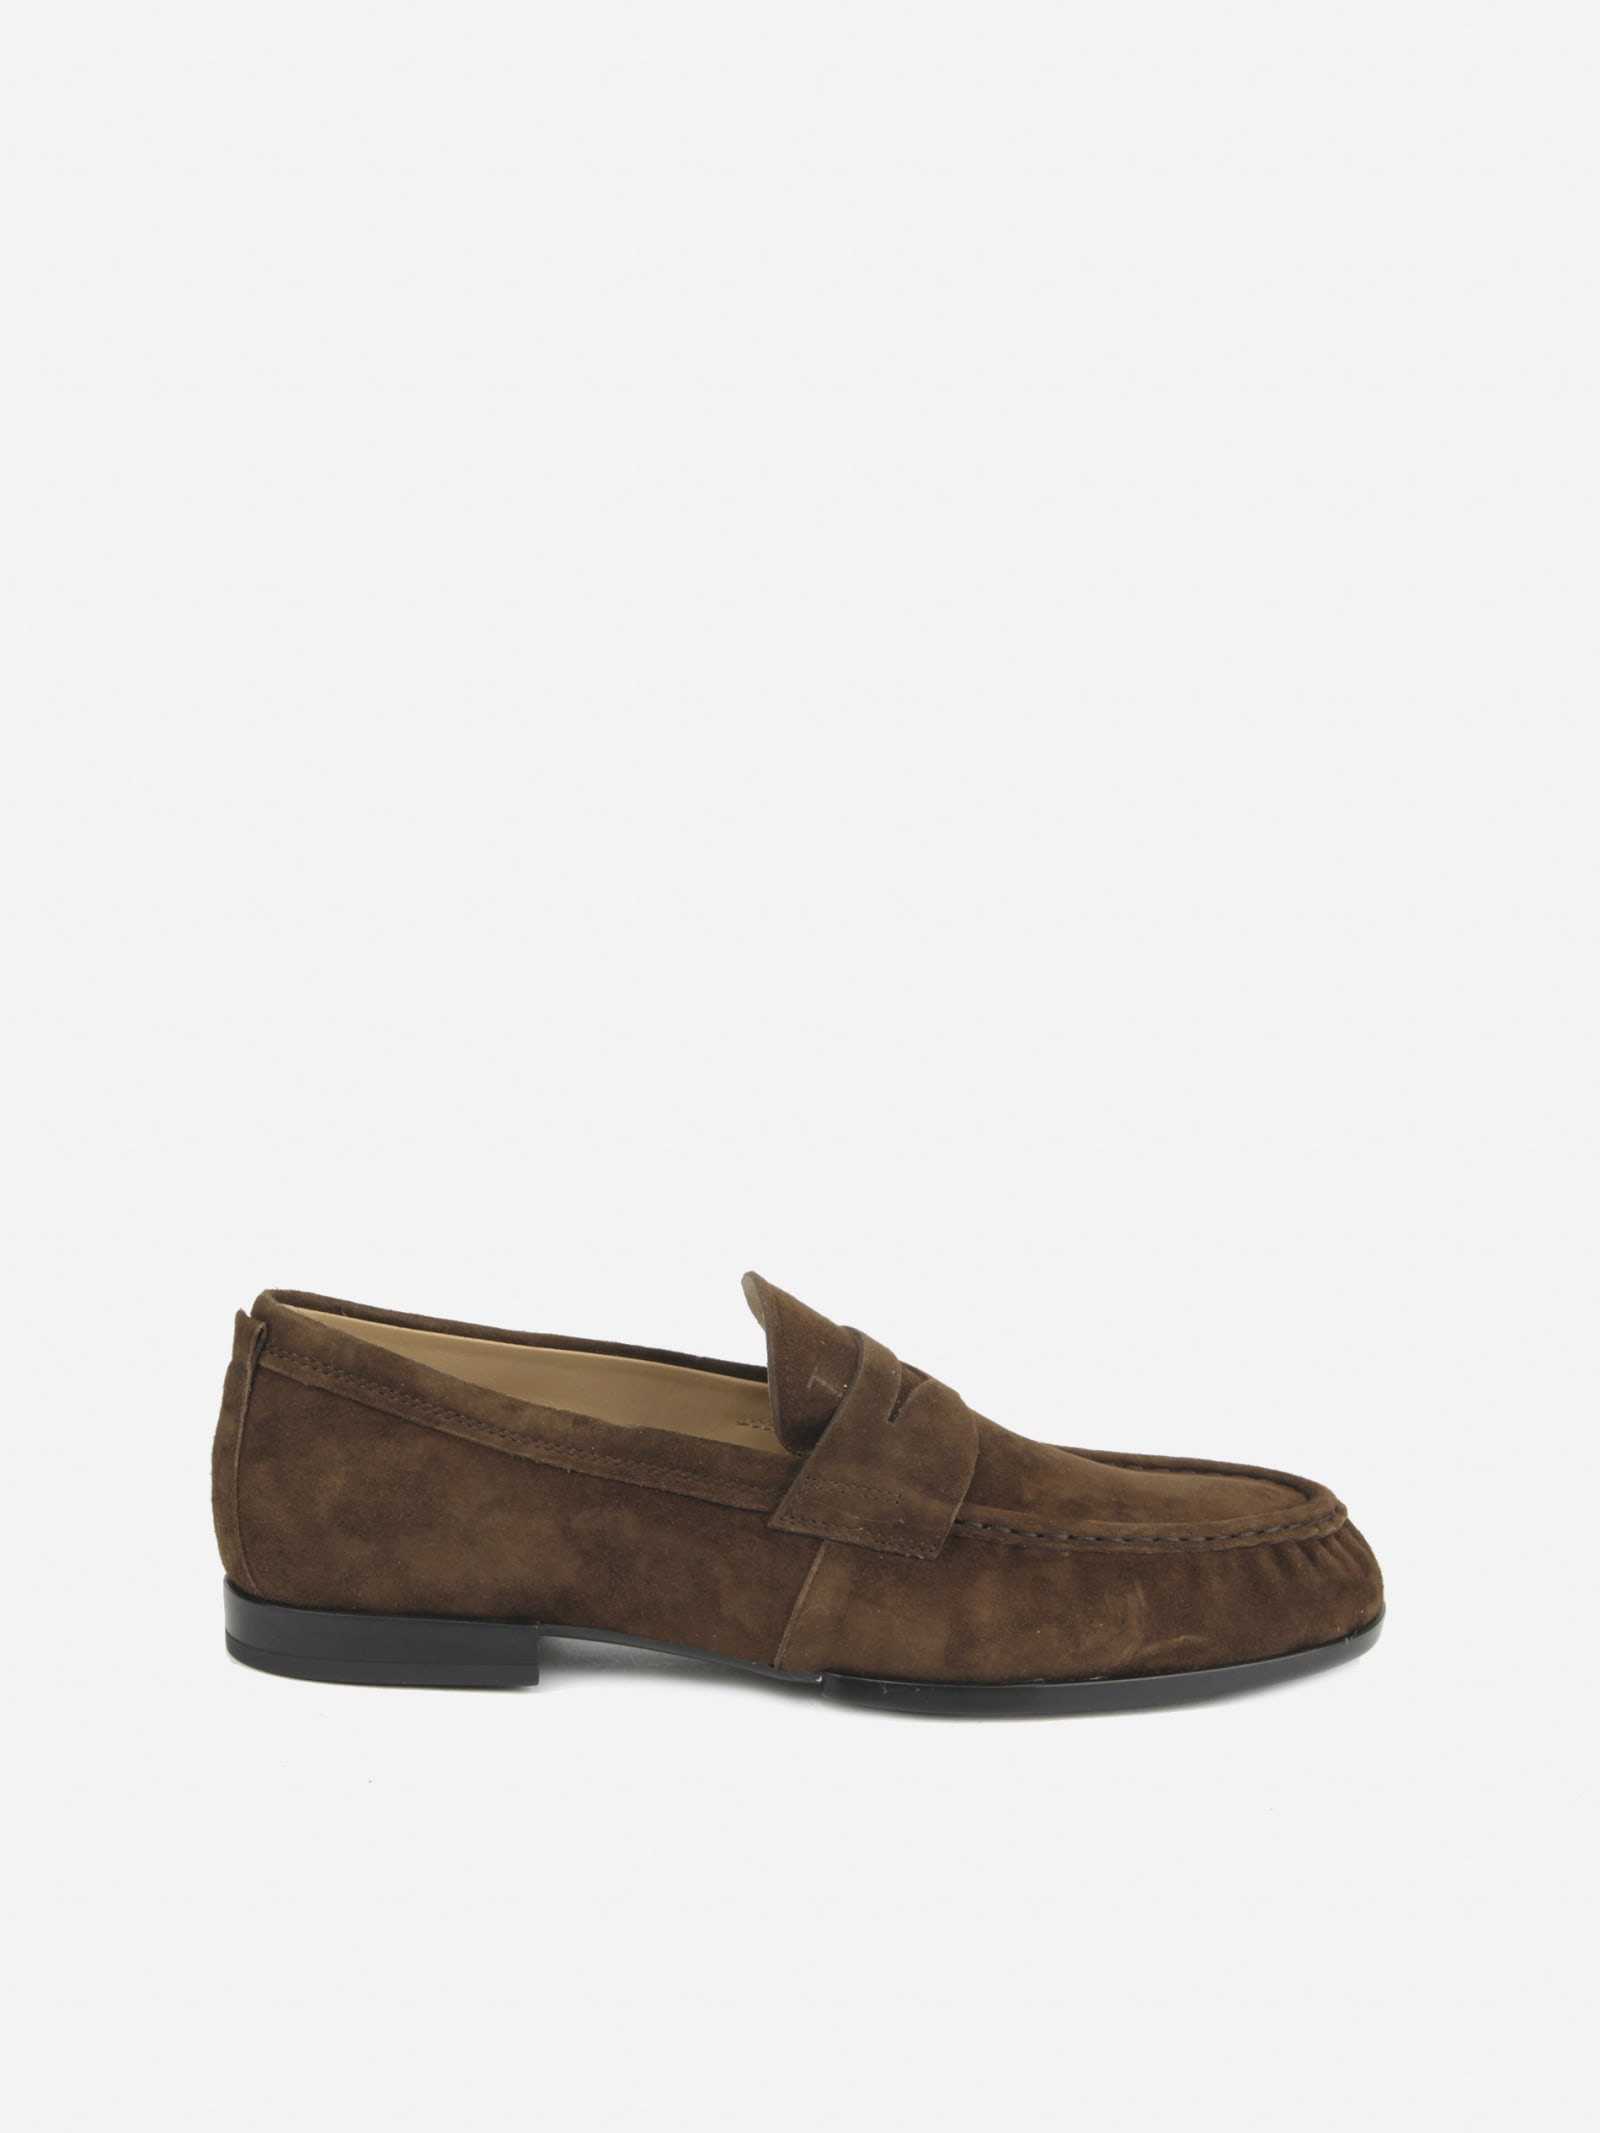 Tods Monogram Suede Loafers